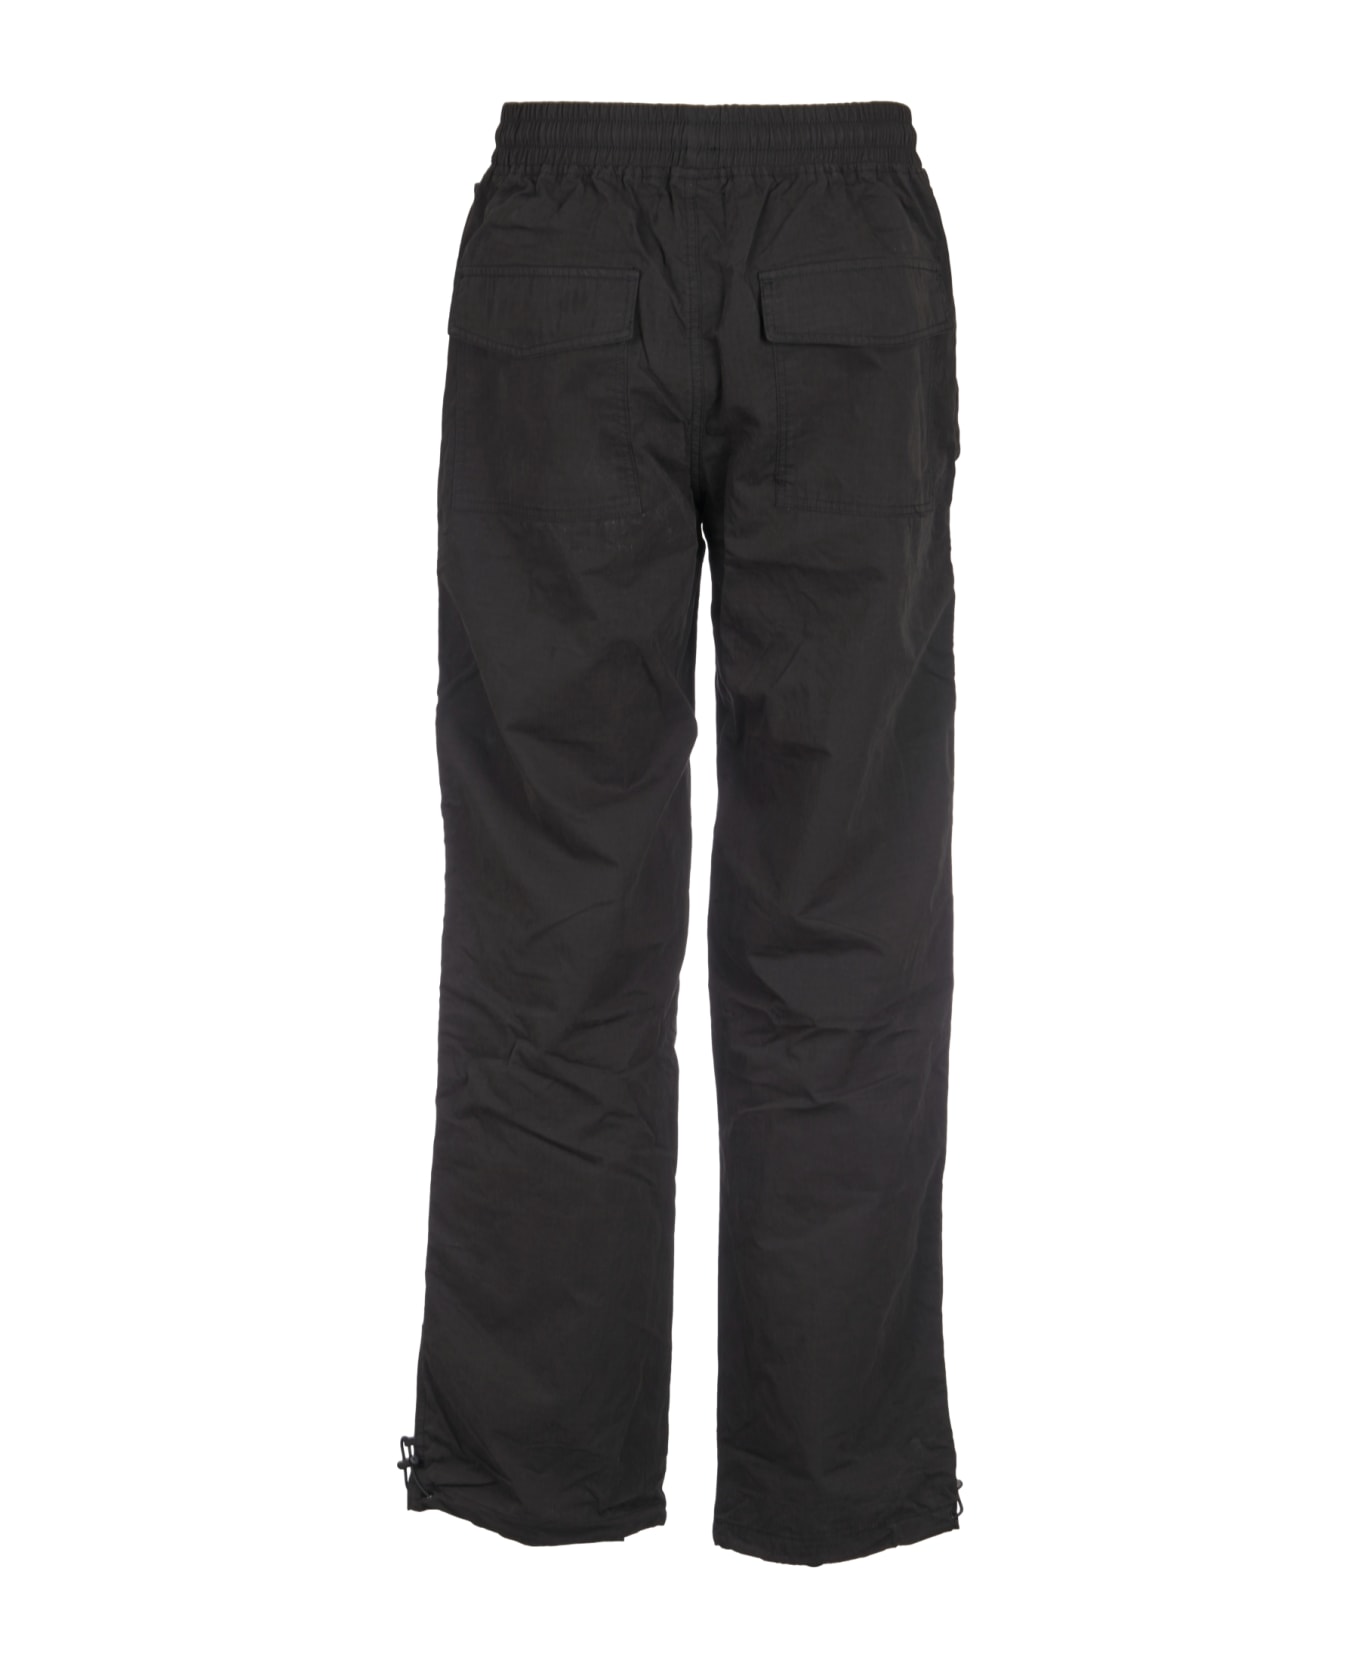 REPRESENT Buttoned Pocket Trousers - Black ボトムス